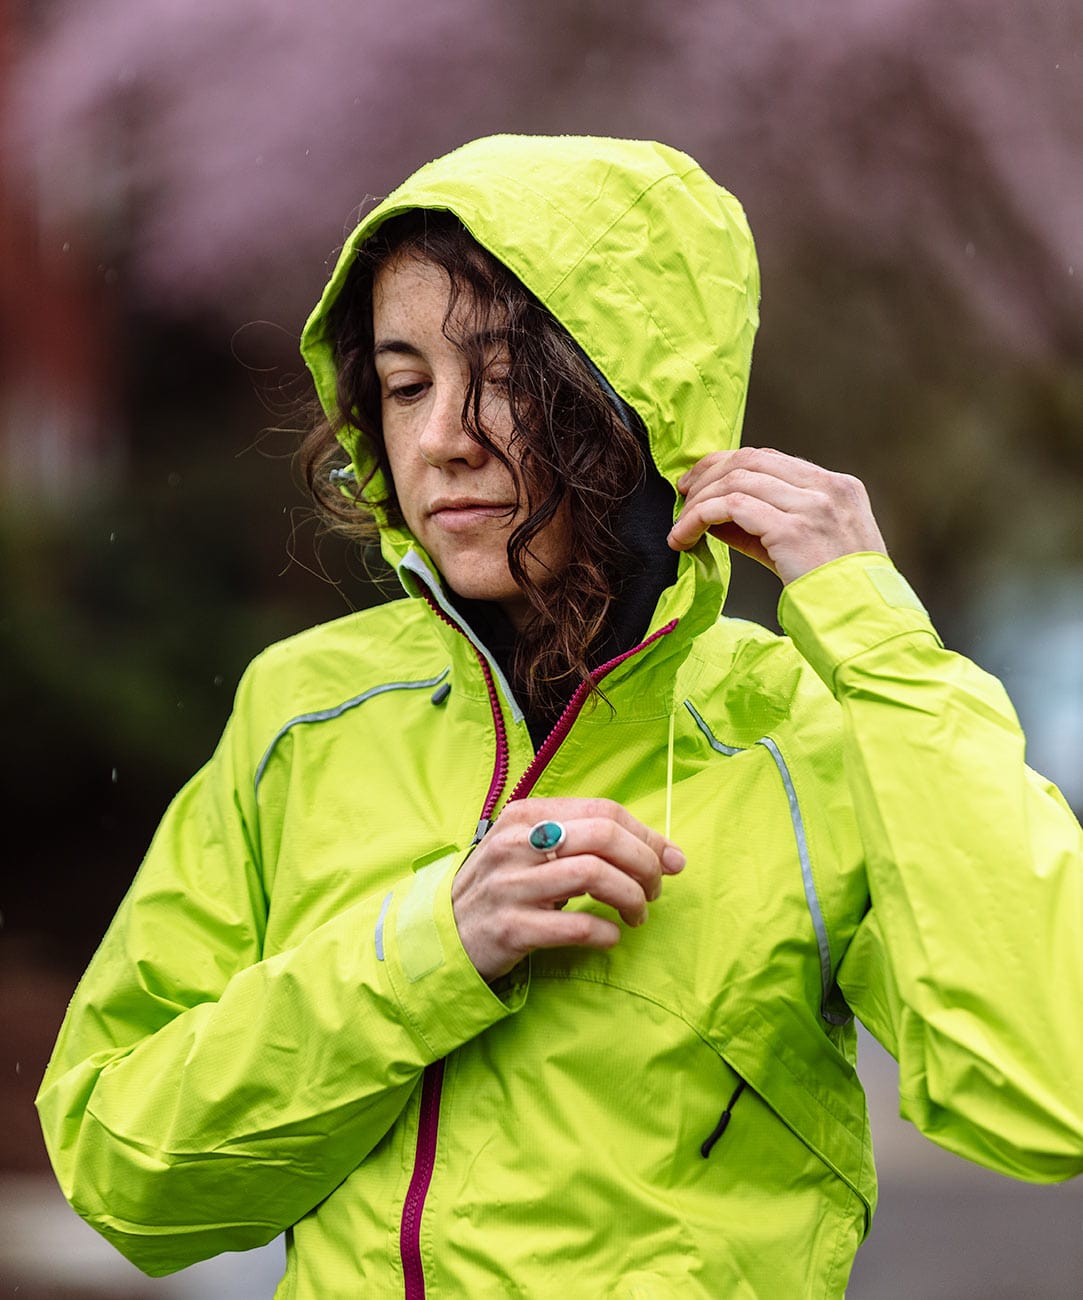 Women's Syncline CC Jacket